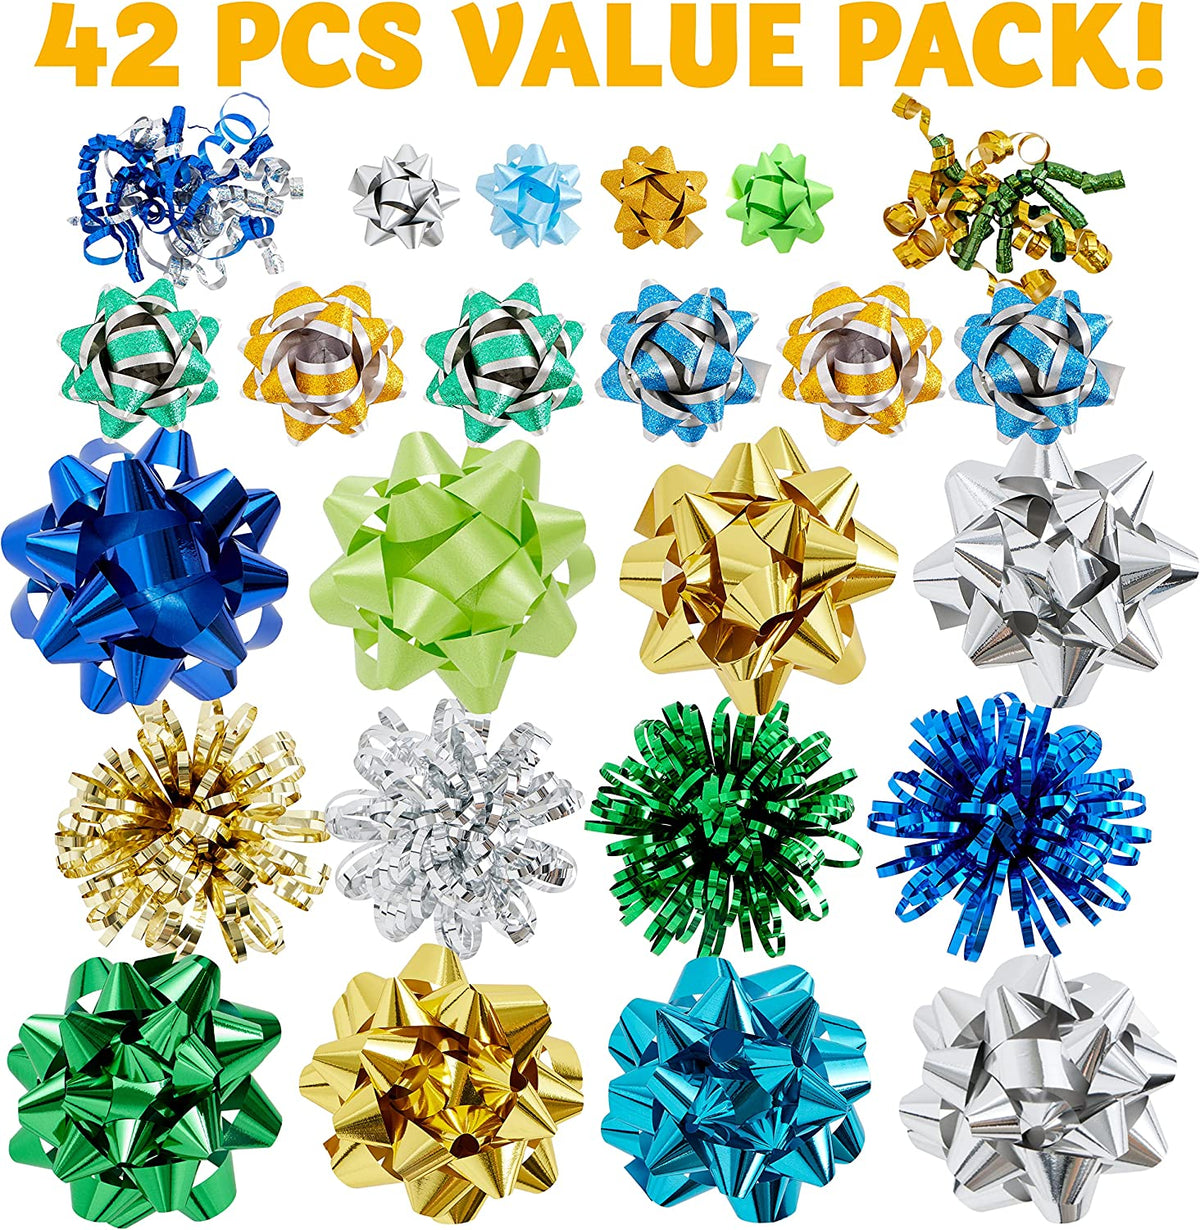 42ct Christmas & Holiday Gift Bows Assortment Peel ‘N Stick 2.5-3.5